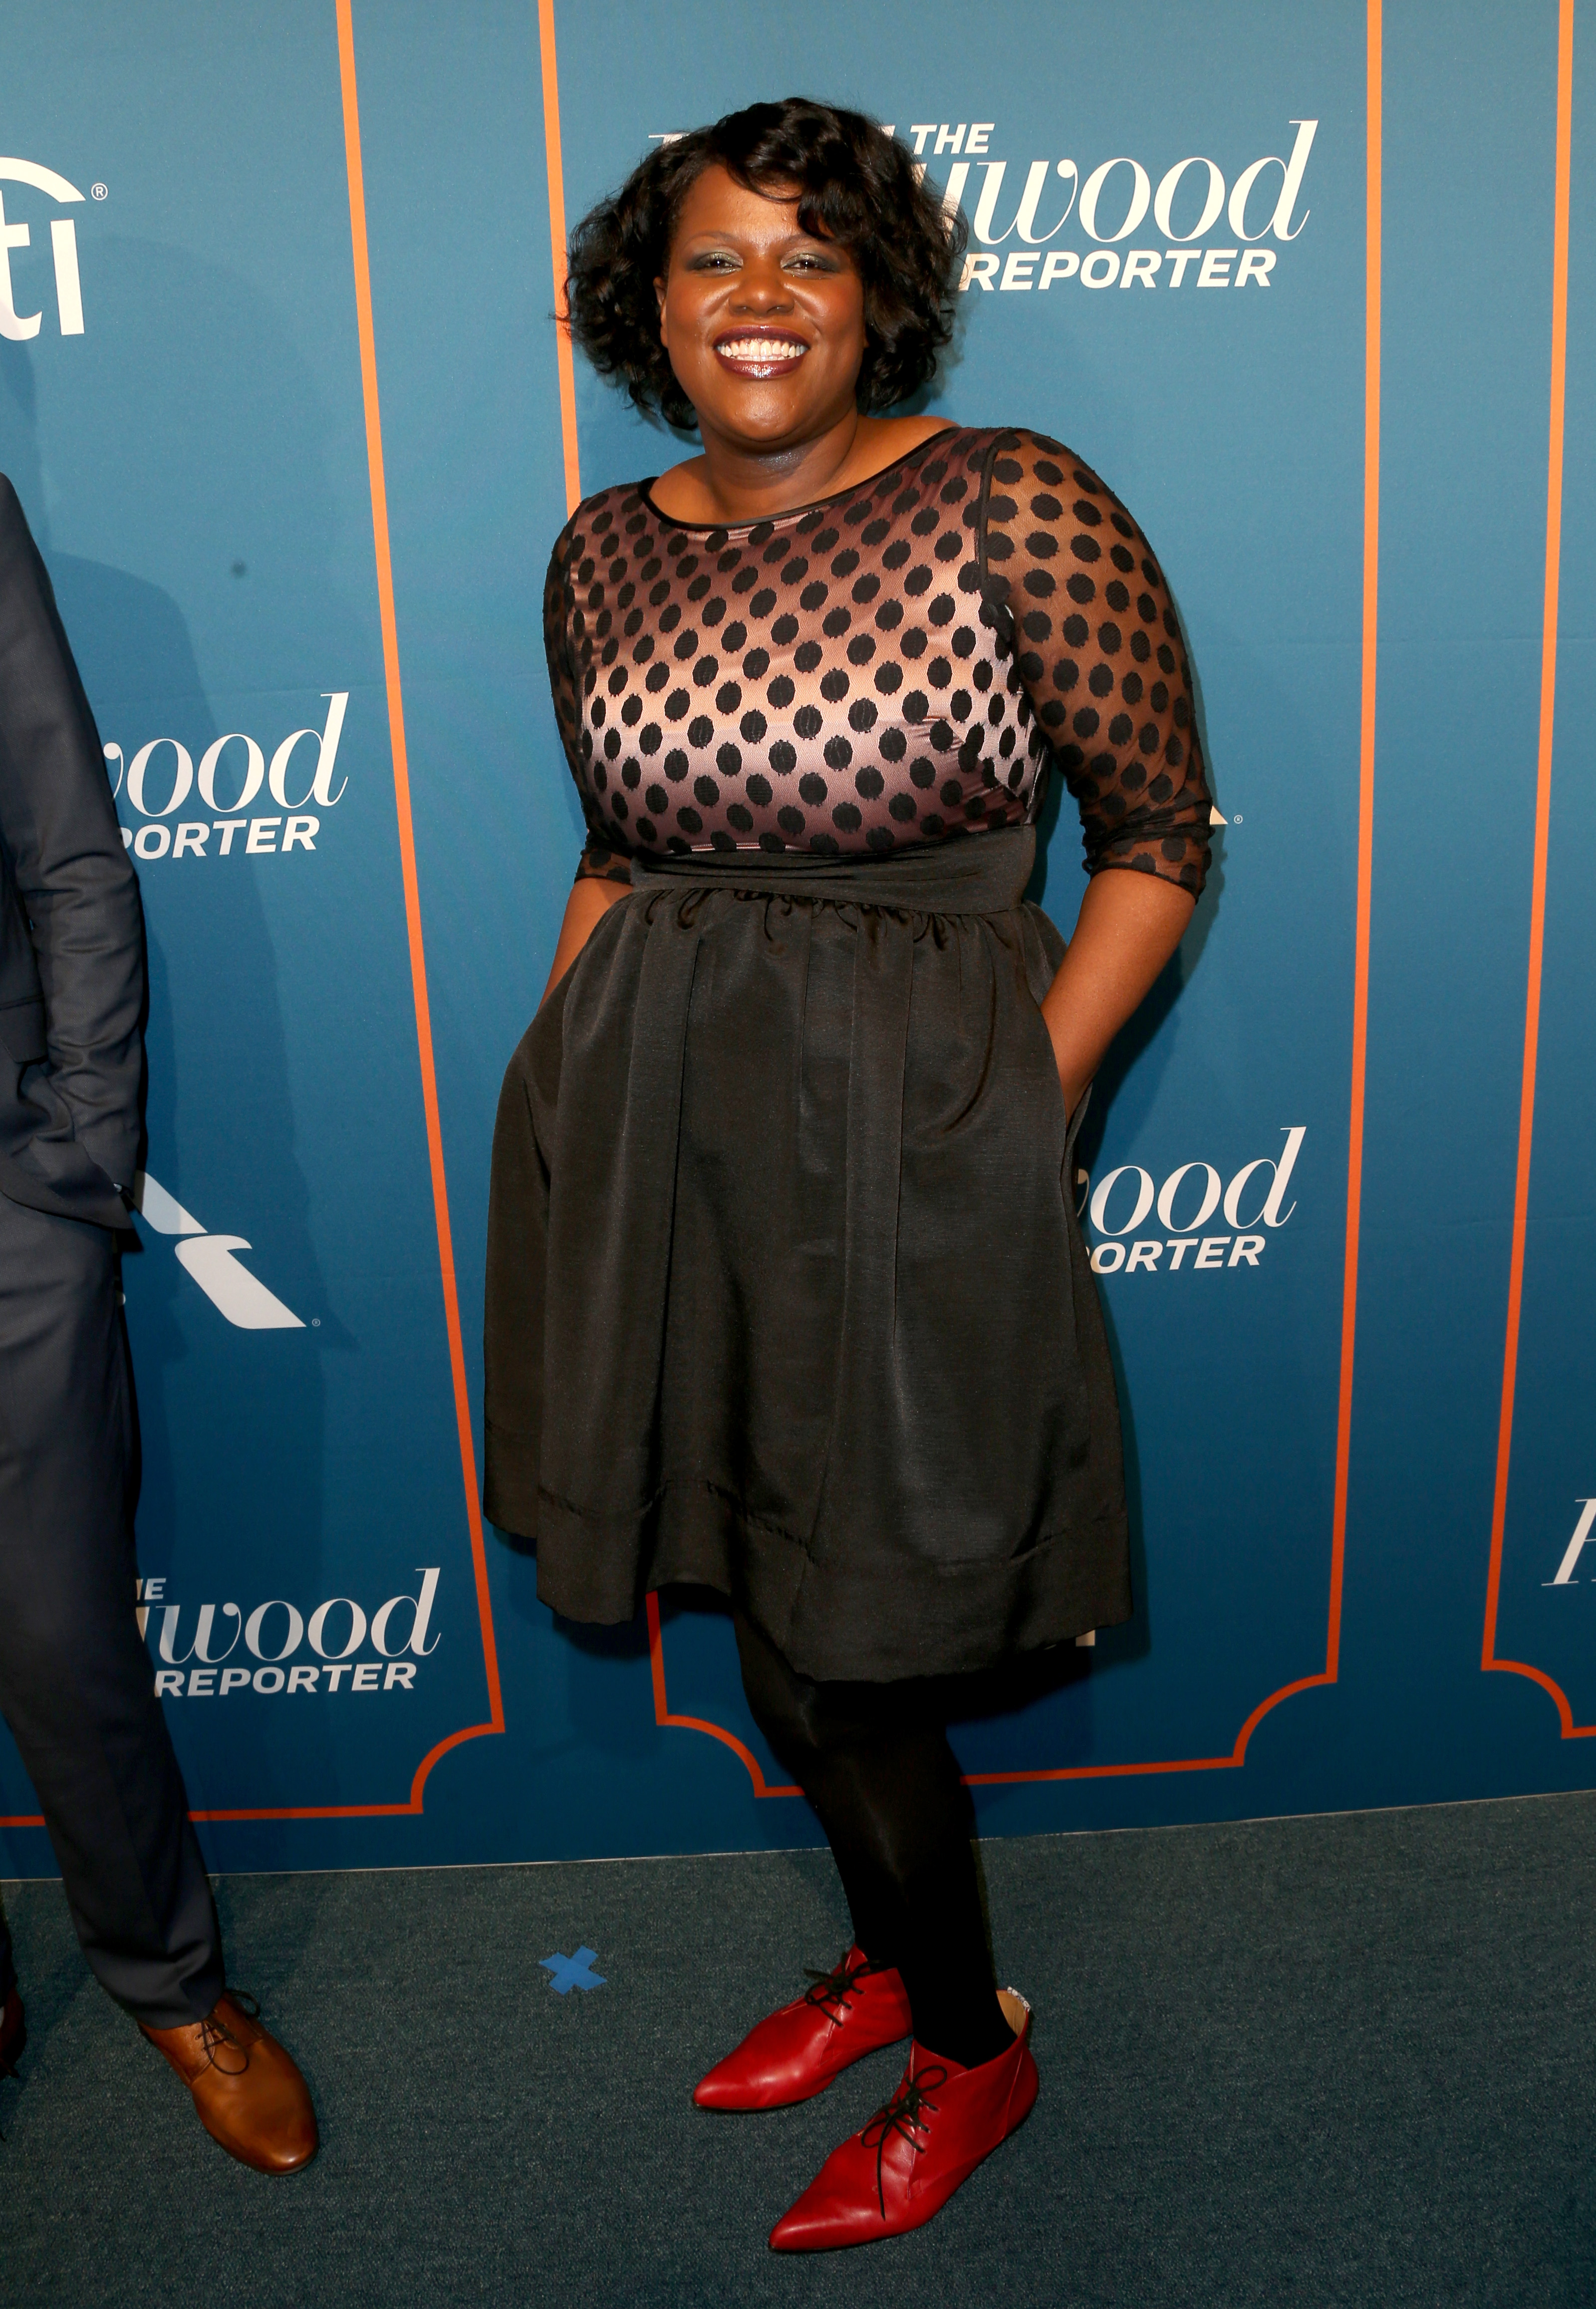 BEVERLY HILLS, CA - FEBRUARY 06:  Film editor Joi McMillon attends The Hollywood Reporter 5th Annual Nominees Night at Spago on February 6, 2017 in Beverly Hills, California.  (Photo by Frederick M. Brown/Getty Images) (Frederick M. Brown&mdash;Getty Images)